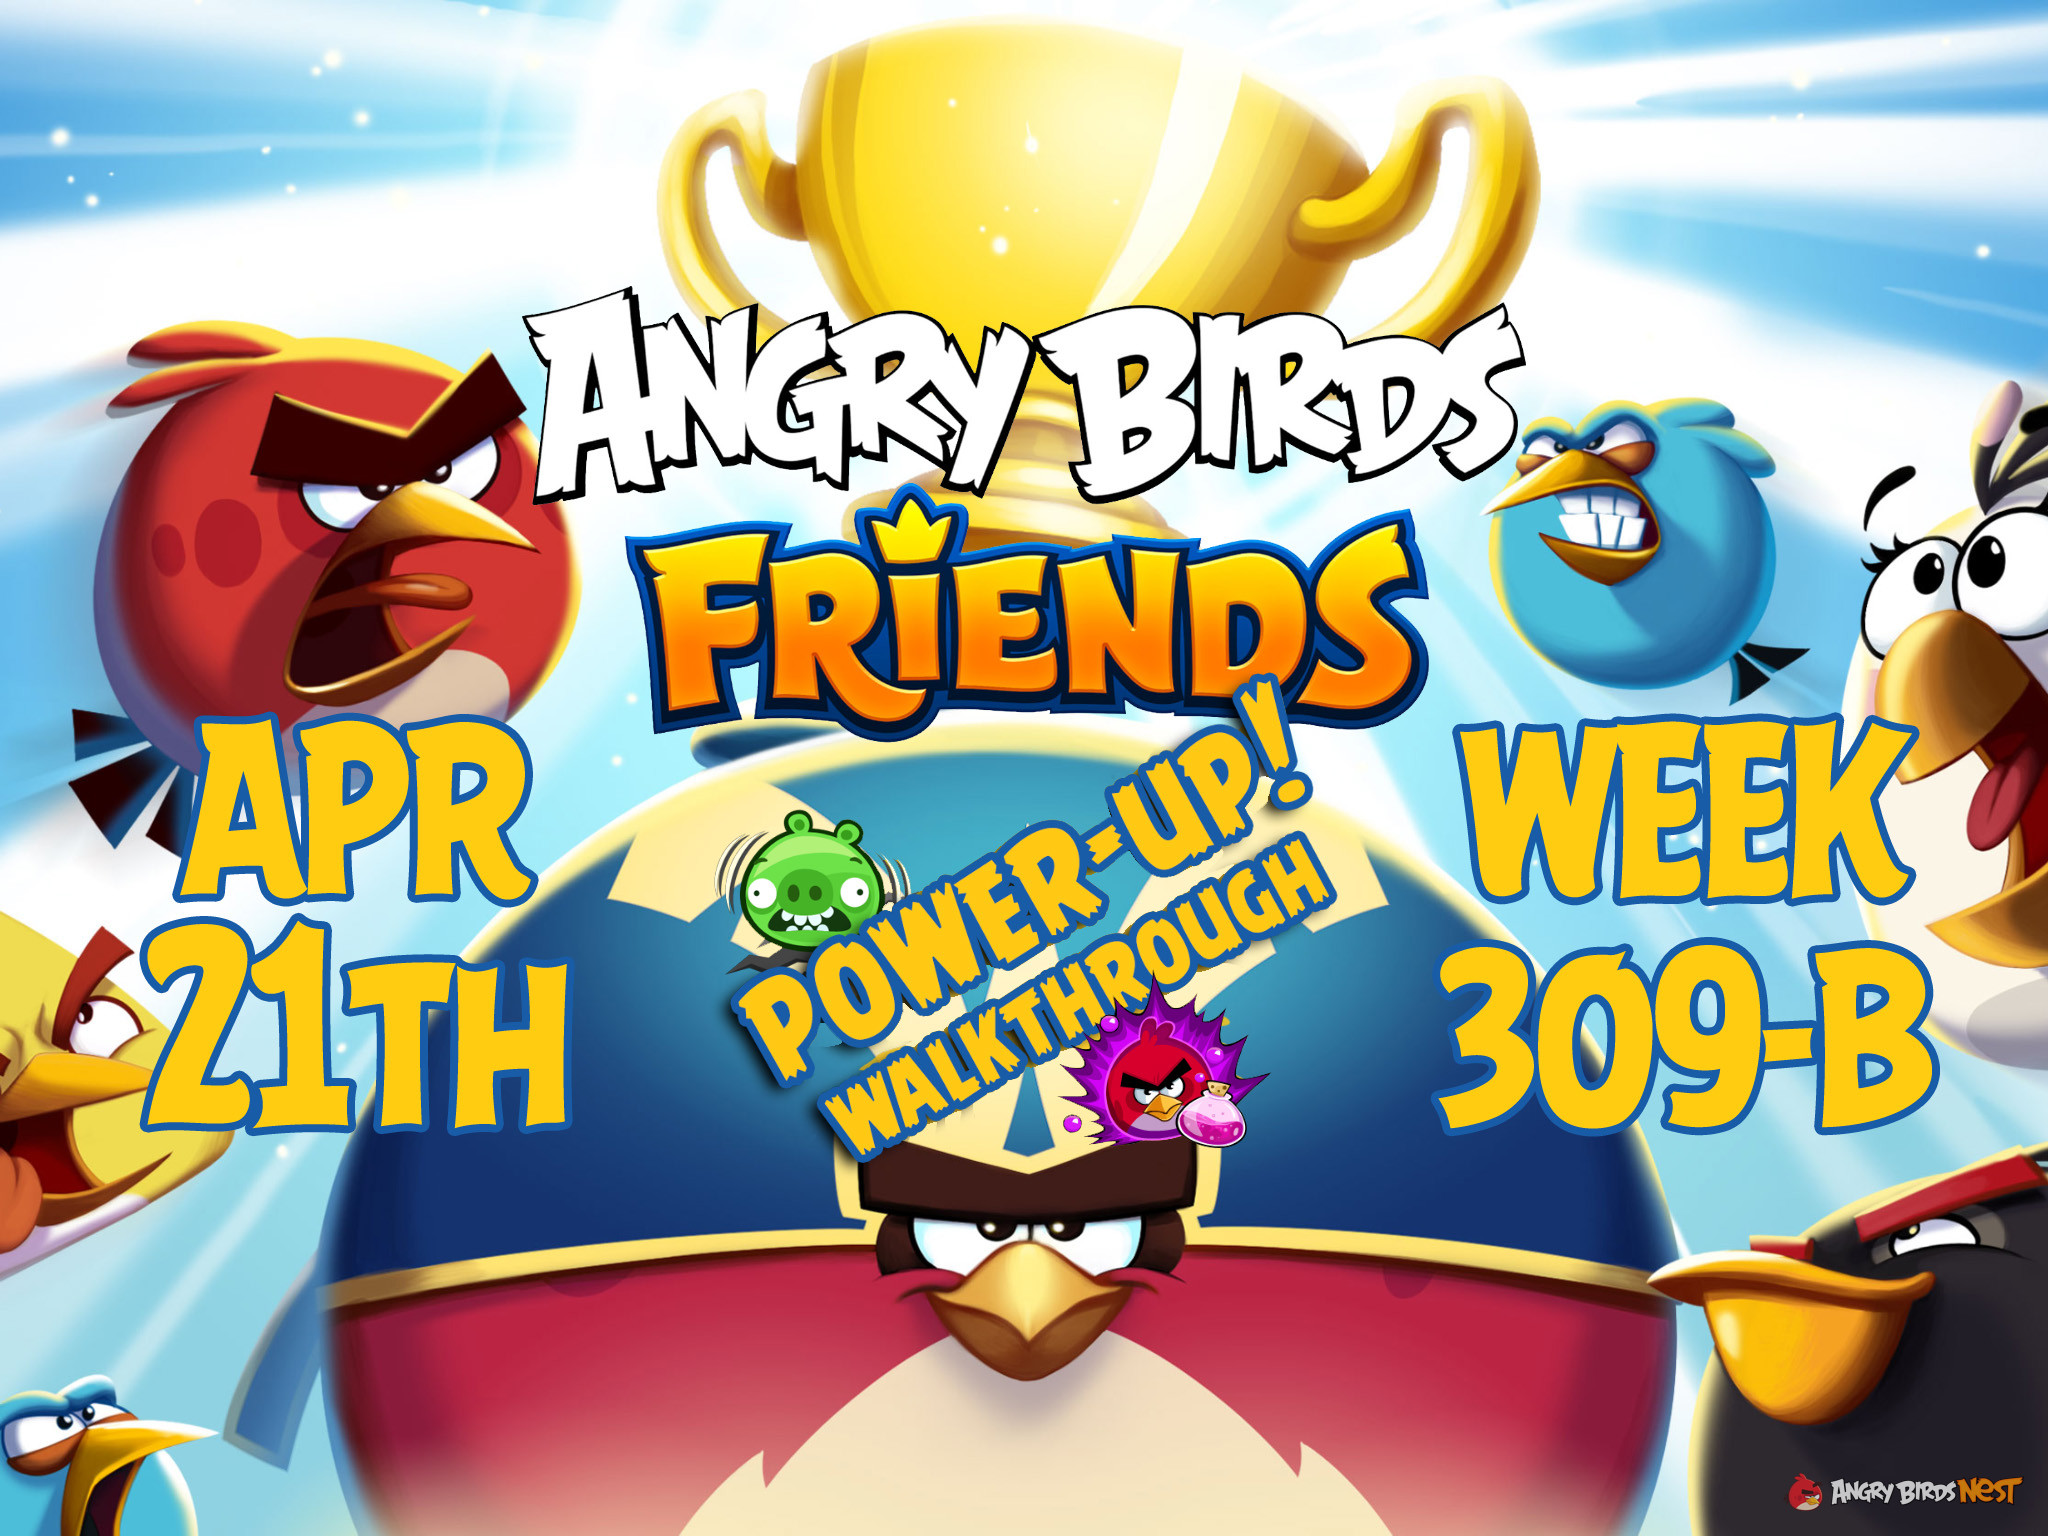 Angry Birds Friends Tournament Week 309-B Feature Image PU